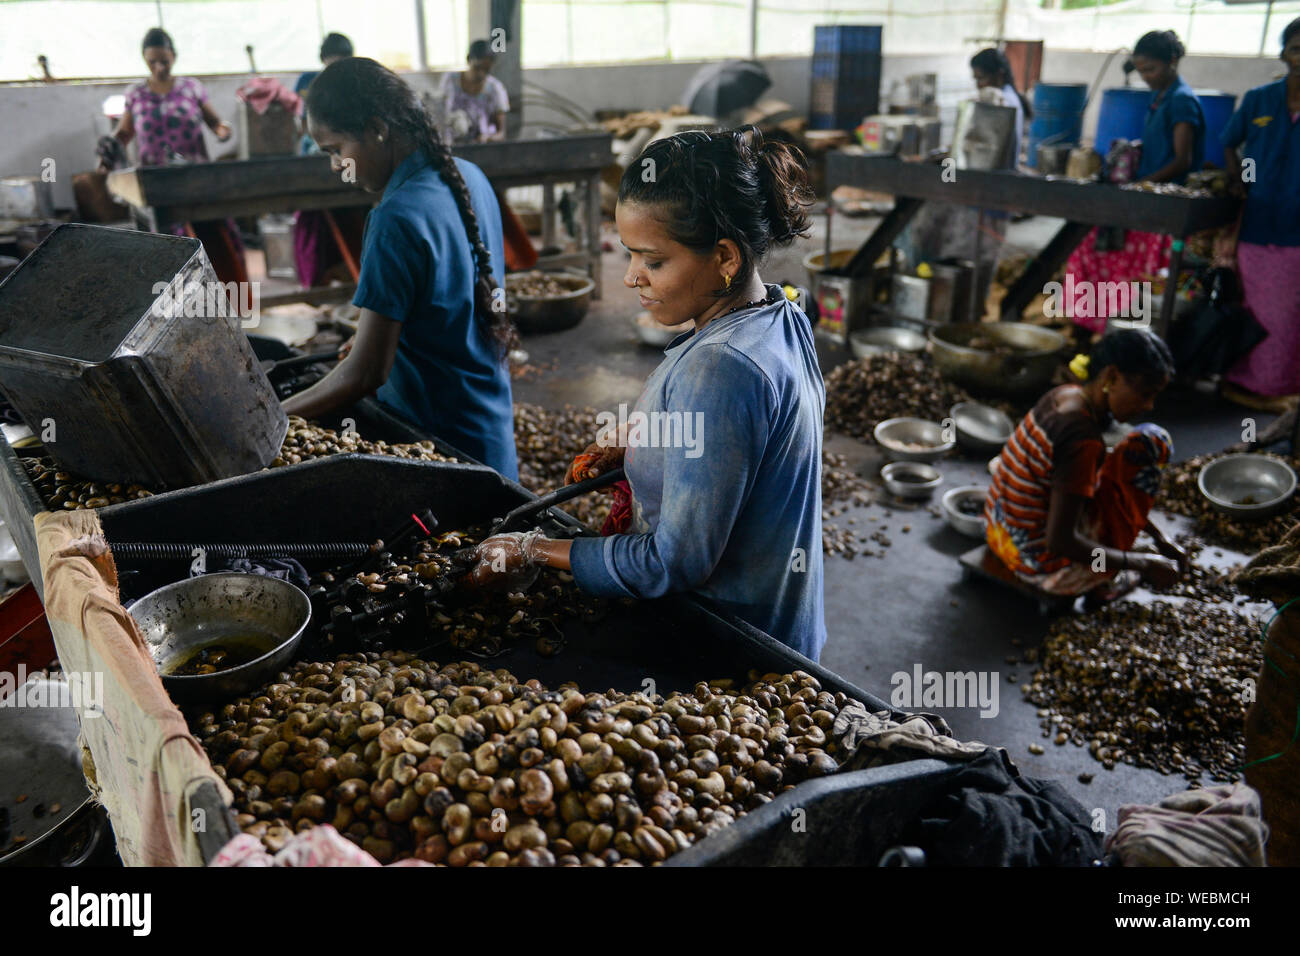 INDIA, Karnataka, Moodbidri, cashew processing factory, imported raw cashew nuts from africa are processed for export, women crack raw nuts manually with iron cracking tool , the nut shells contain a aggressive acid, women protect hands with oil or gloves Stock Photo